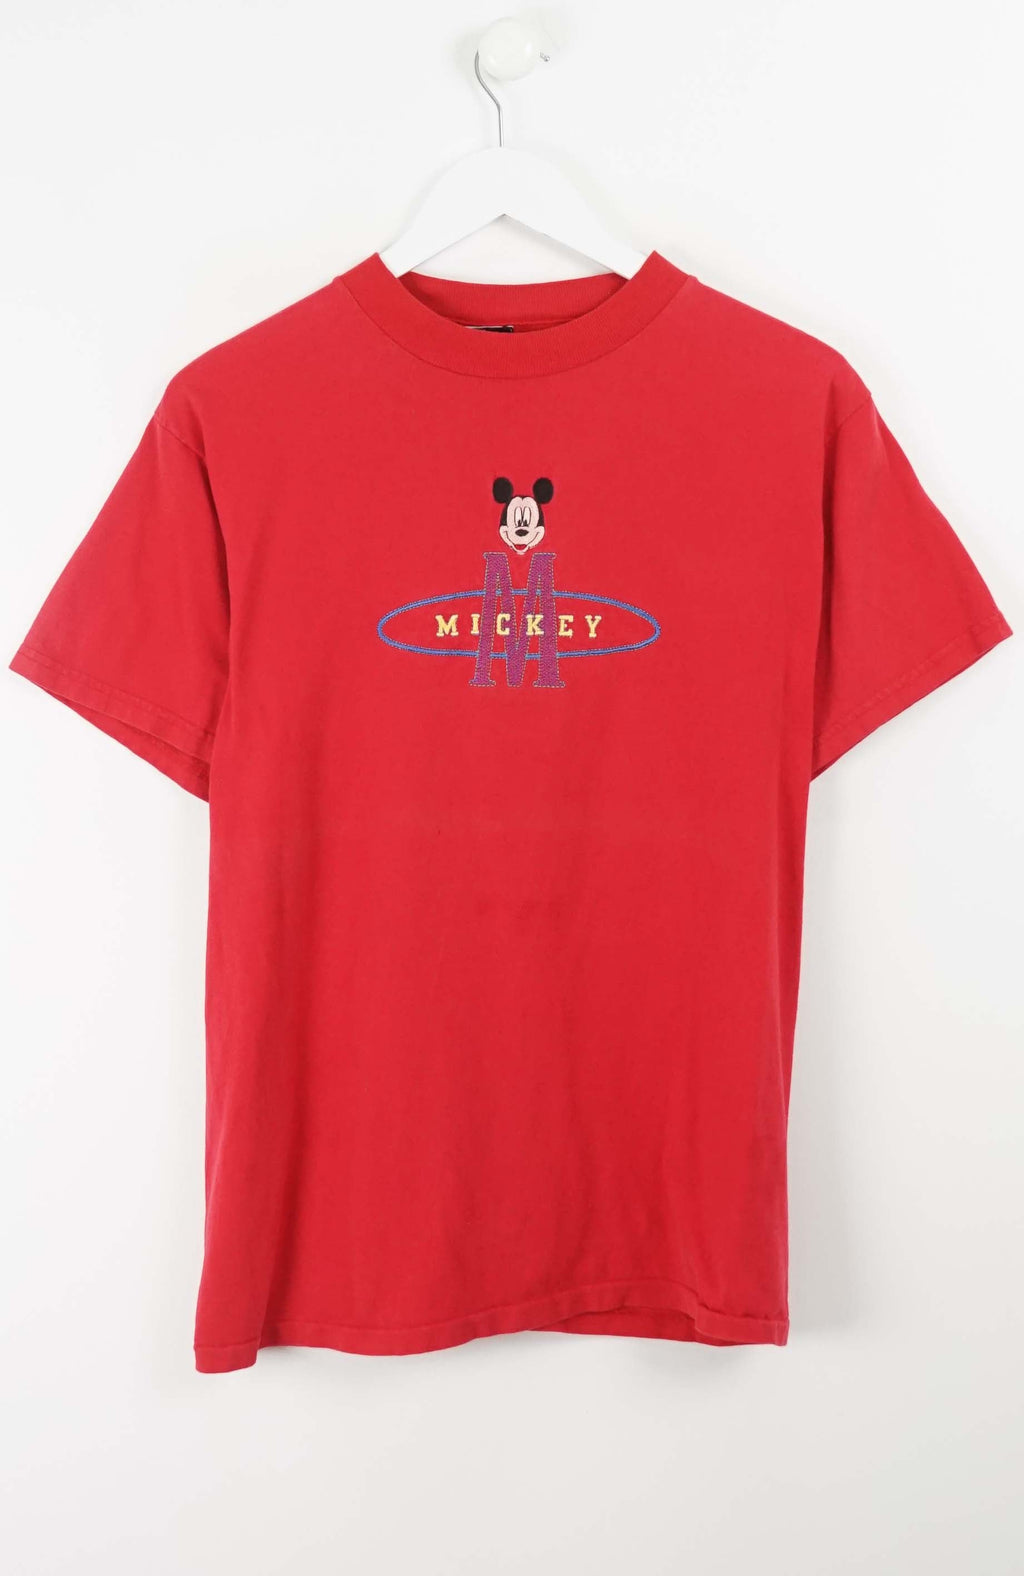 VINTAGE MICKEY MOUSE T-SHIRT (S)